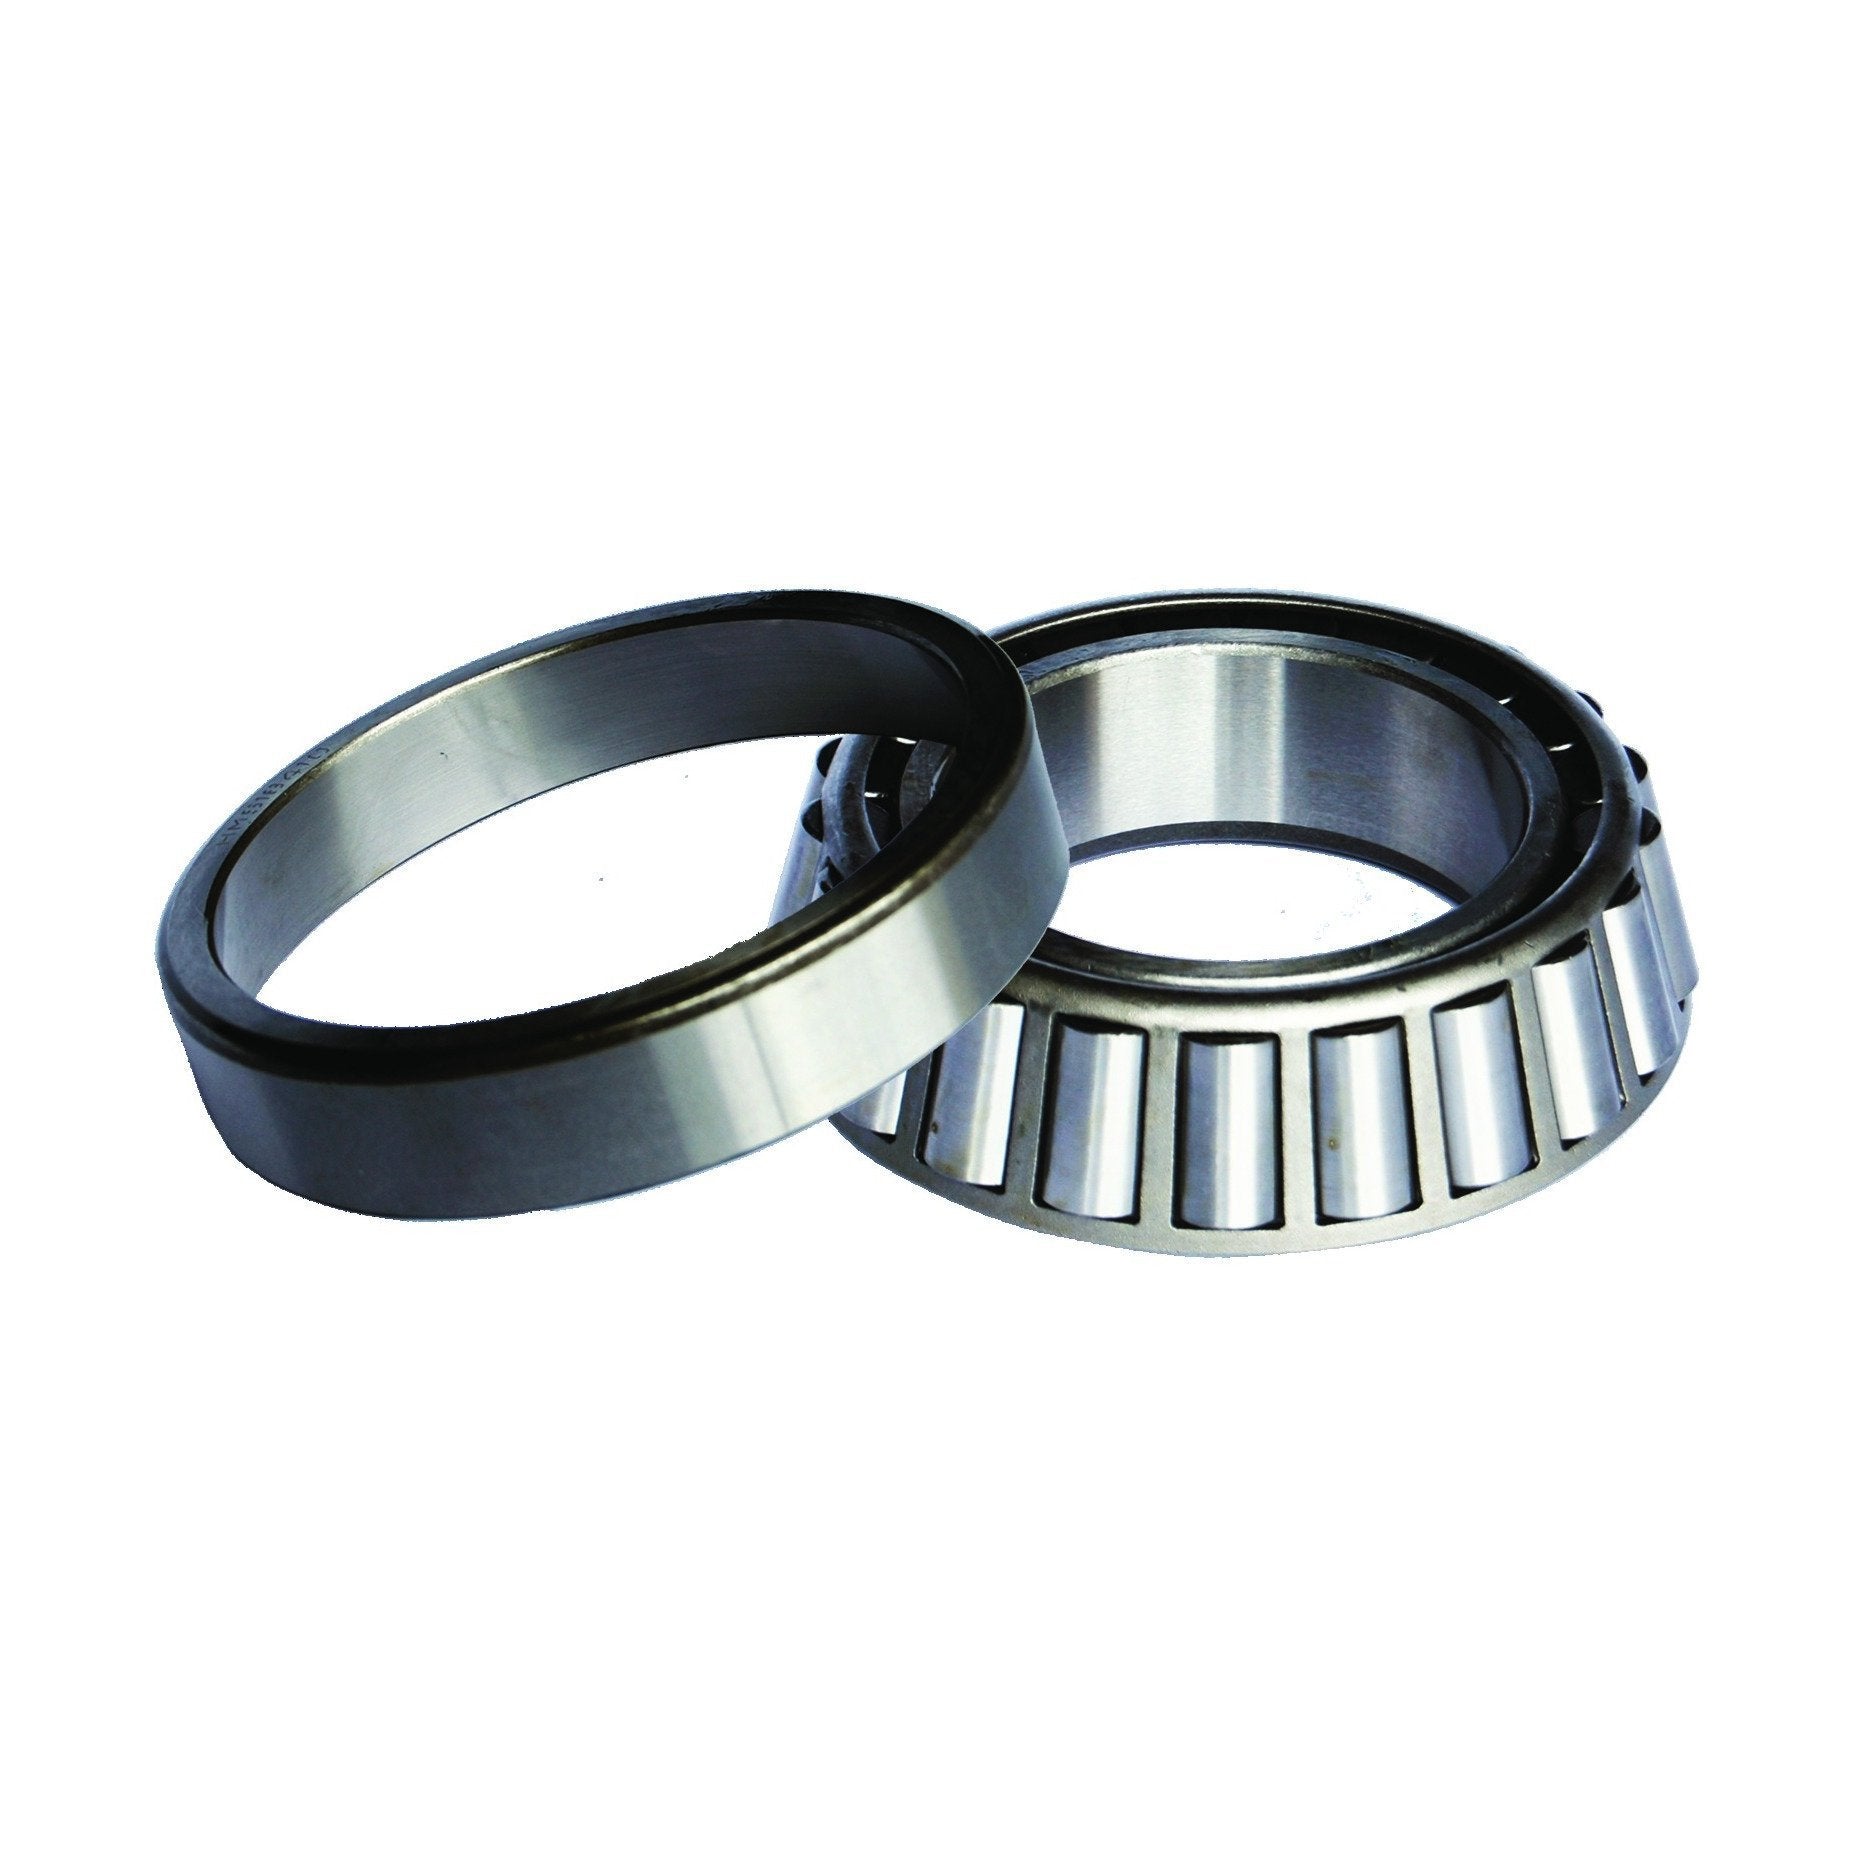 Fortpro SET403 Cone/Cup Tapered Roller Bearings Set 594A/592A | F276157